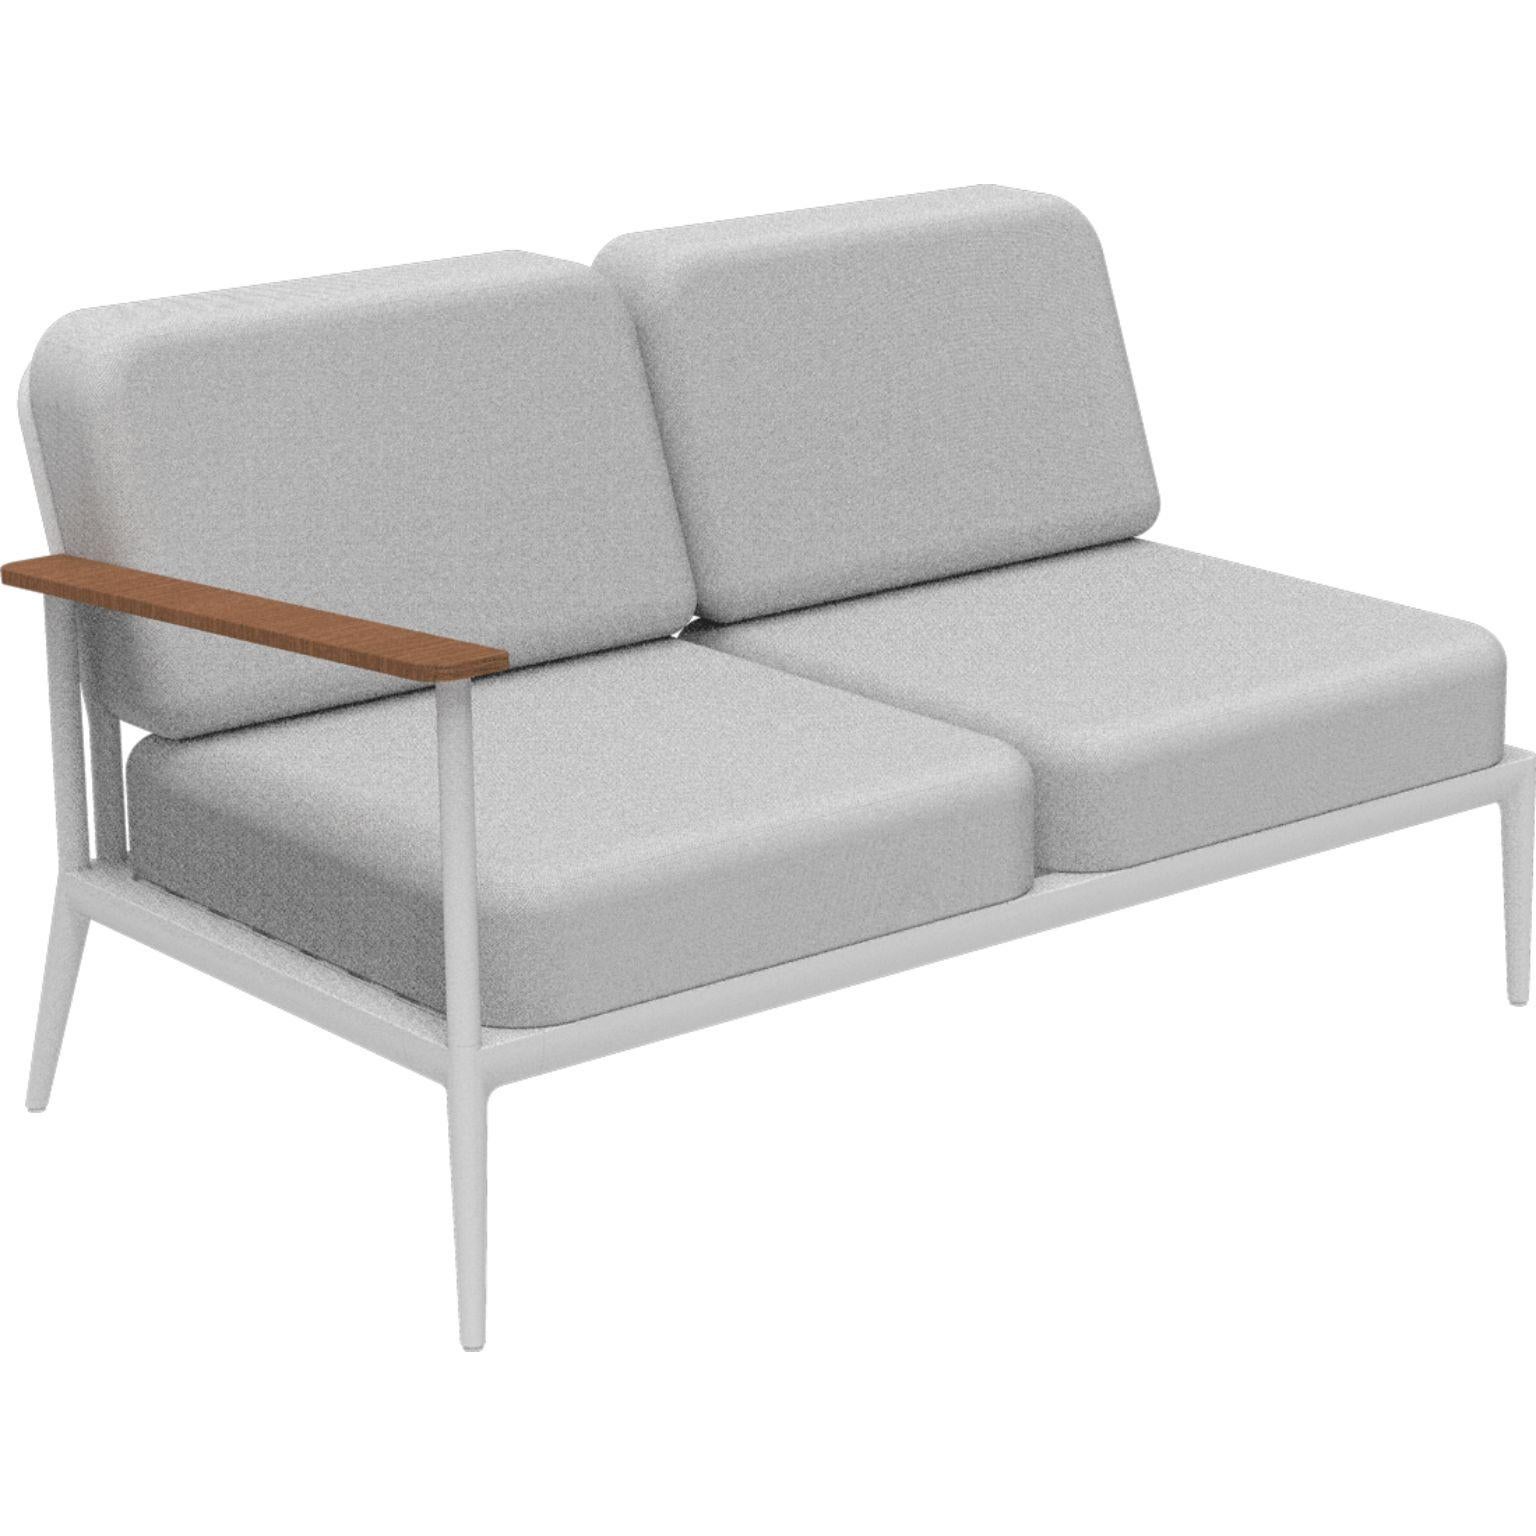 Nature White Double Right modular sofa by MOWEE
Dimensions: D85 x W144 x H81 cm (seat height 42 cm).
Material: Aluminum, upholstery and Iroko Wood.
Weight: 29 kg.
Also available in different colors and finishes.

An unmistakable collection for